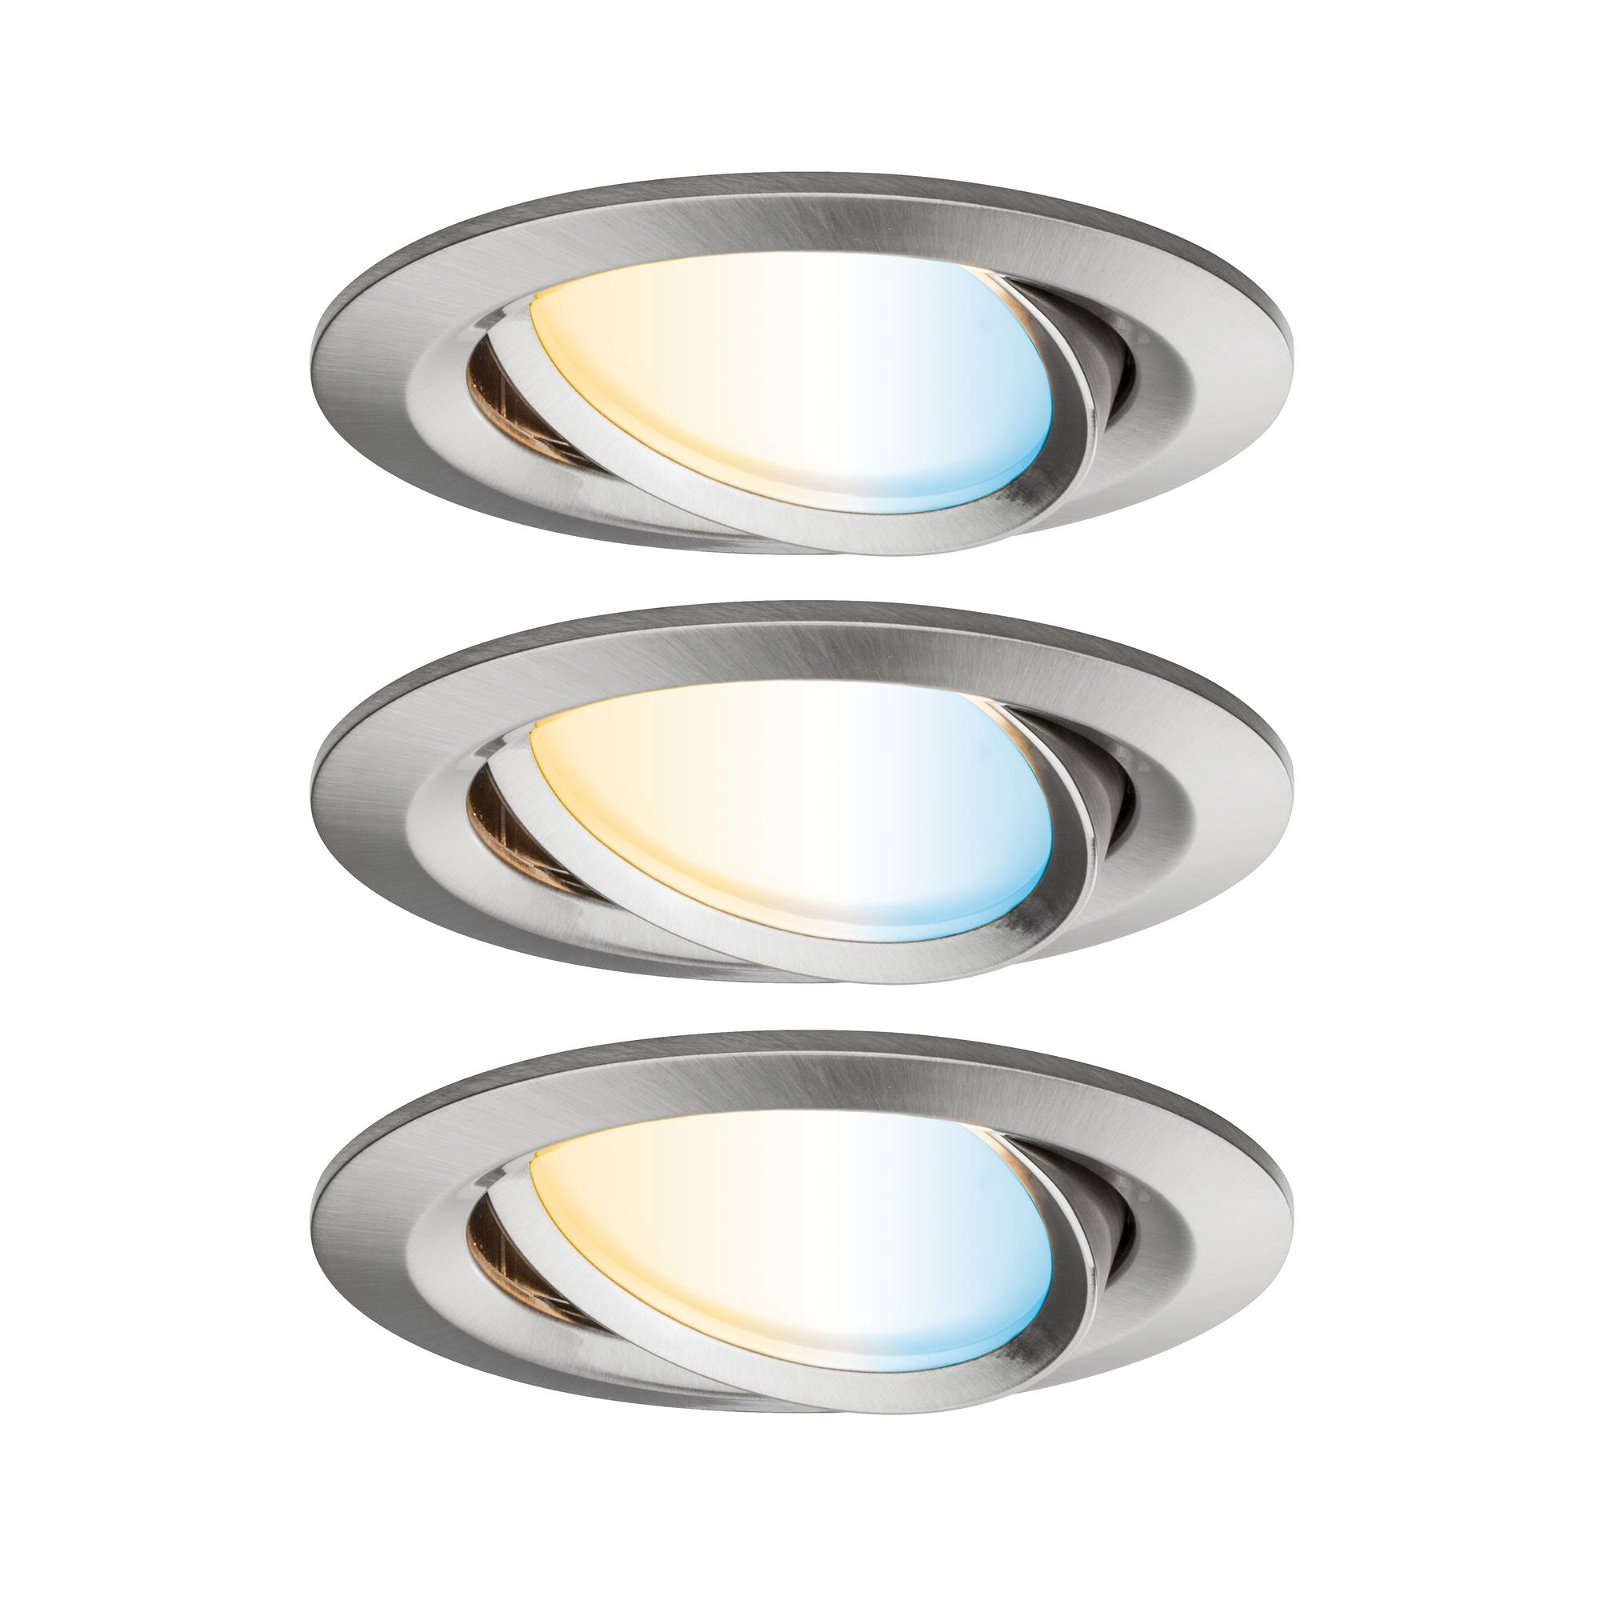 LED Recessed luminaire Smart Home Zigbee Nova Plus Coin Basic Set Swivelling round 84mm 50° Coin 3x6W 3x470lm 230V dimmable Tunable White Brushed iron